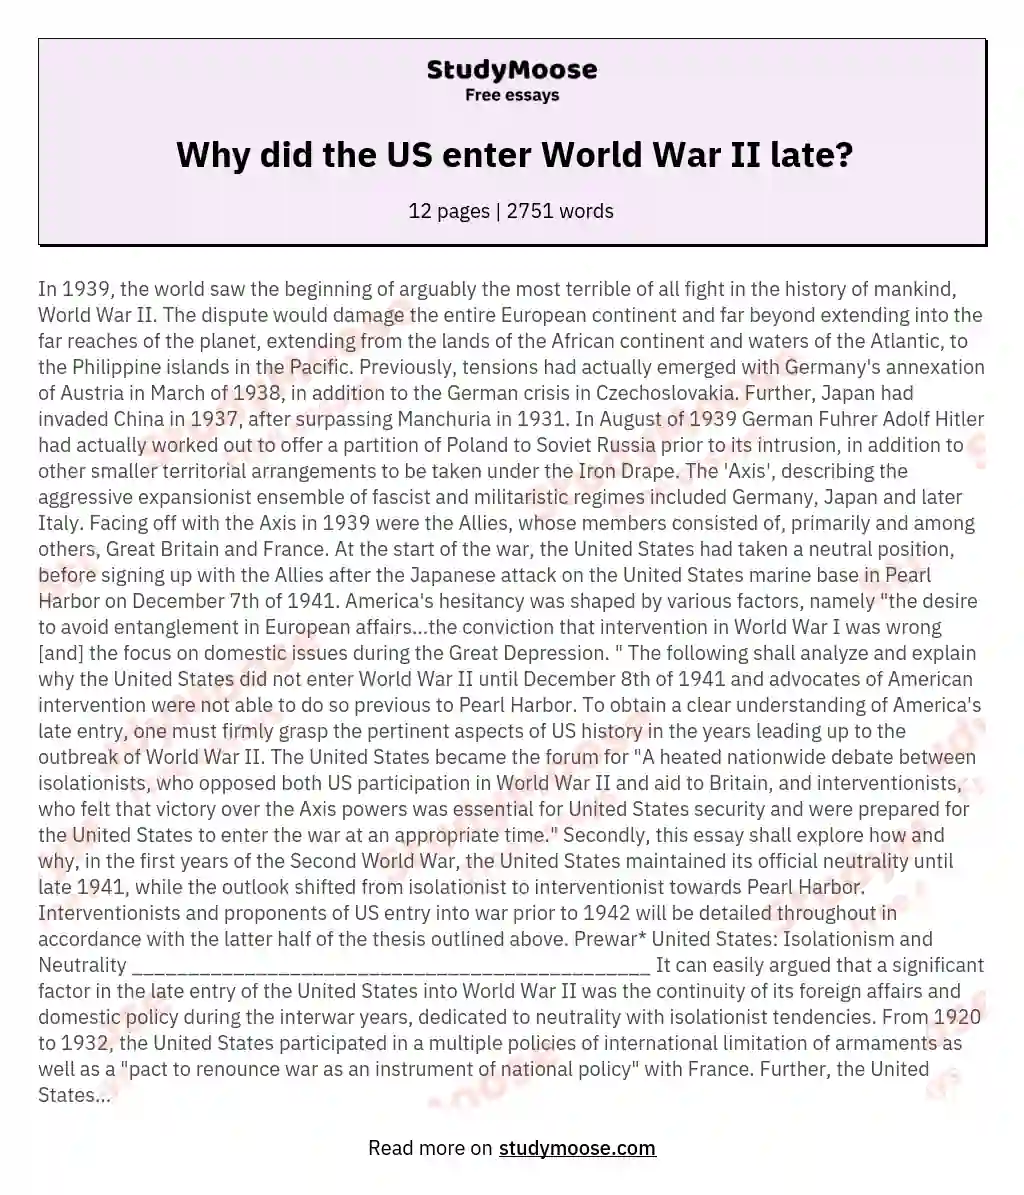 Why did the US enter World War II late?